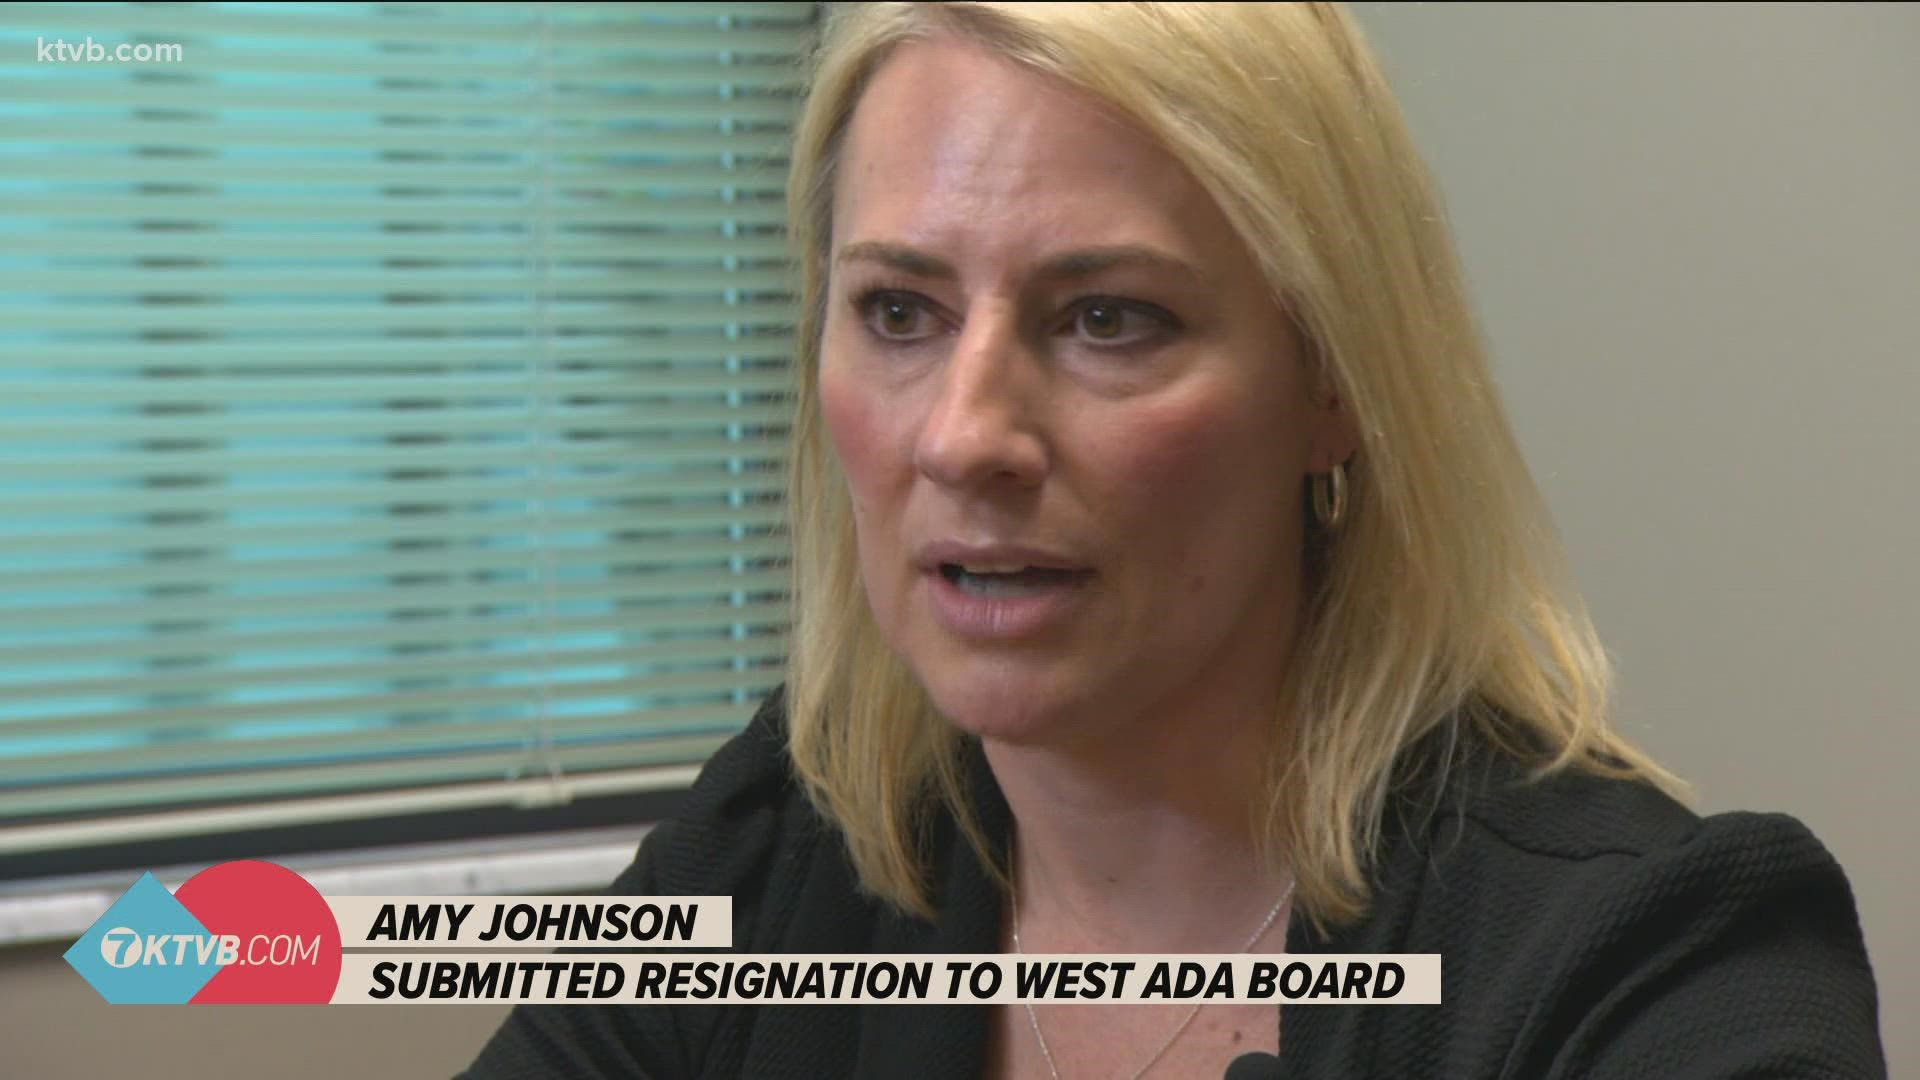 In her resignation letter, Johnson, the zone 2 trustee, cited harassment and threats directed at her and her family.